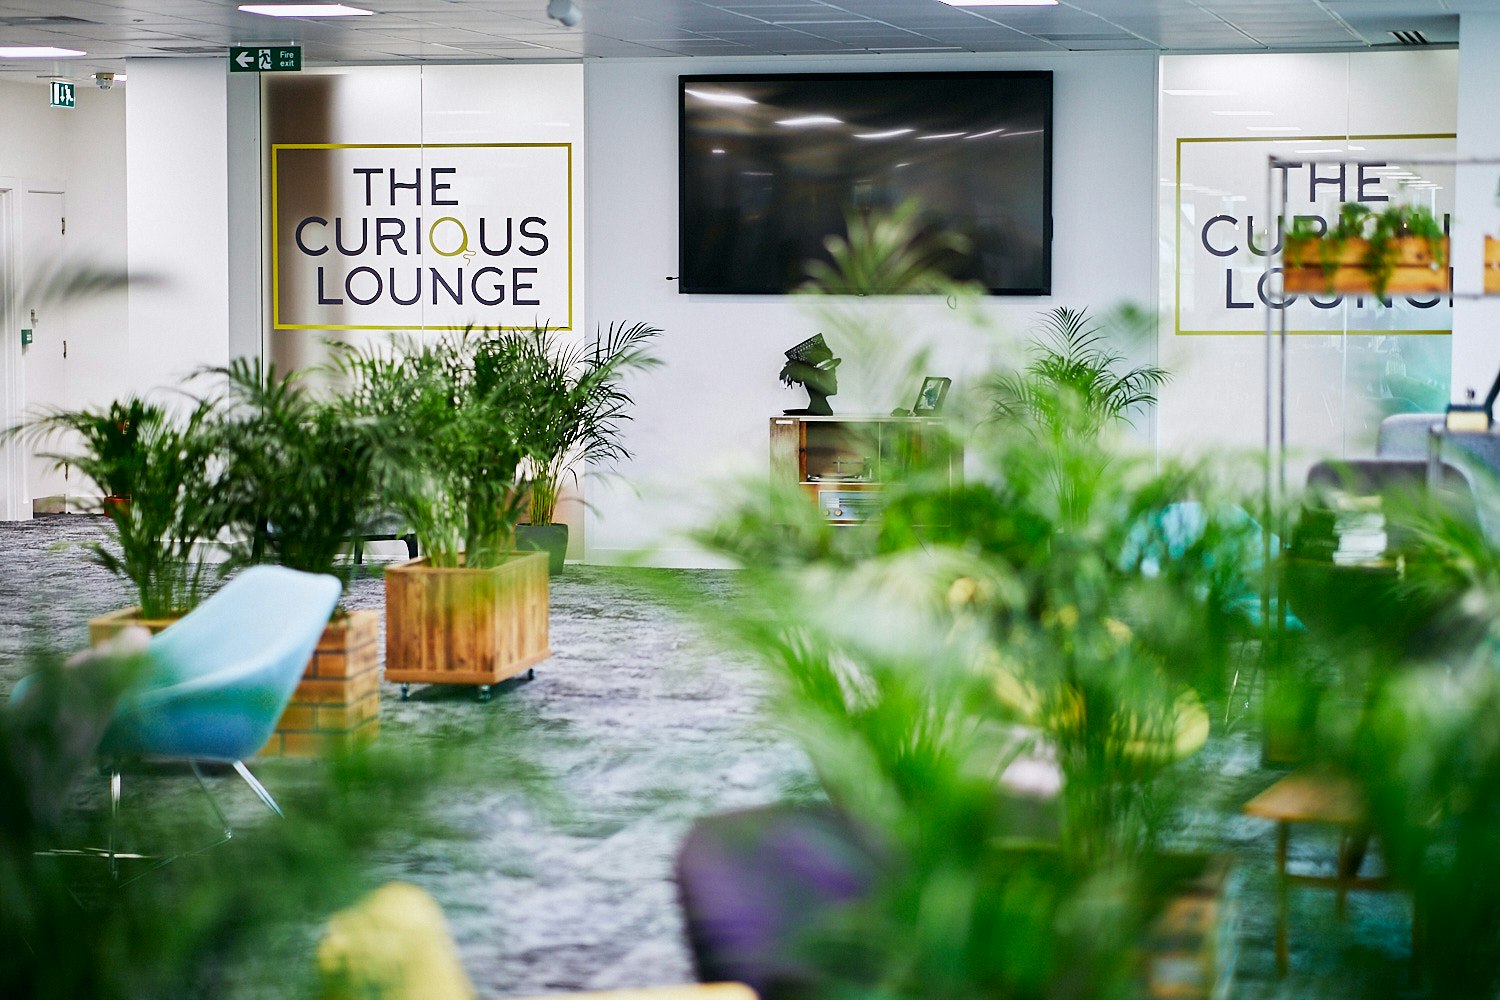 The Curious Lounge - The Lounge image 4